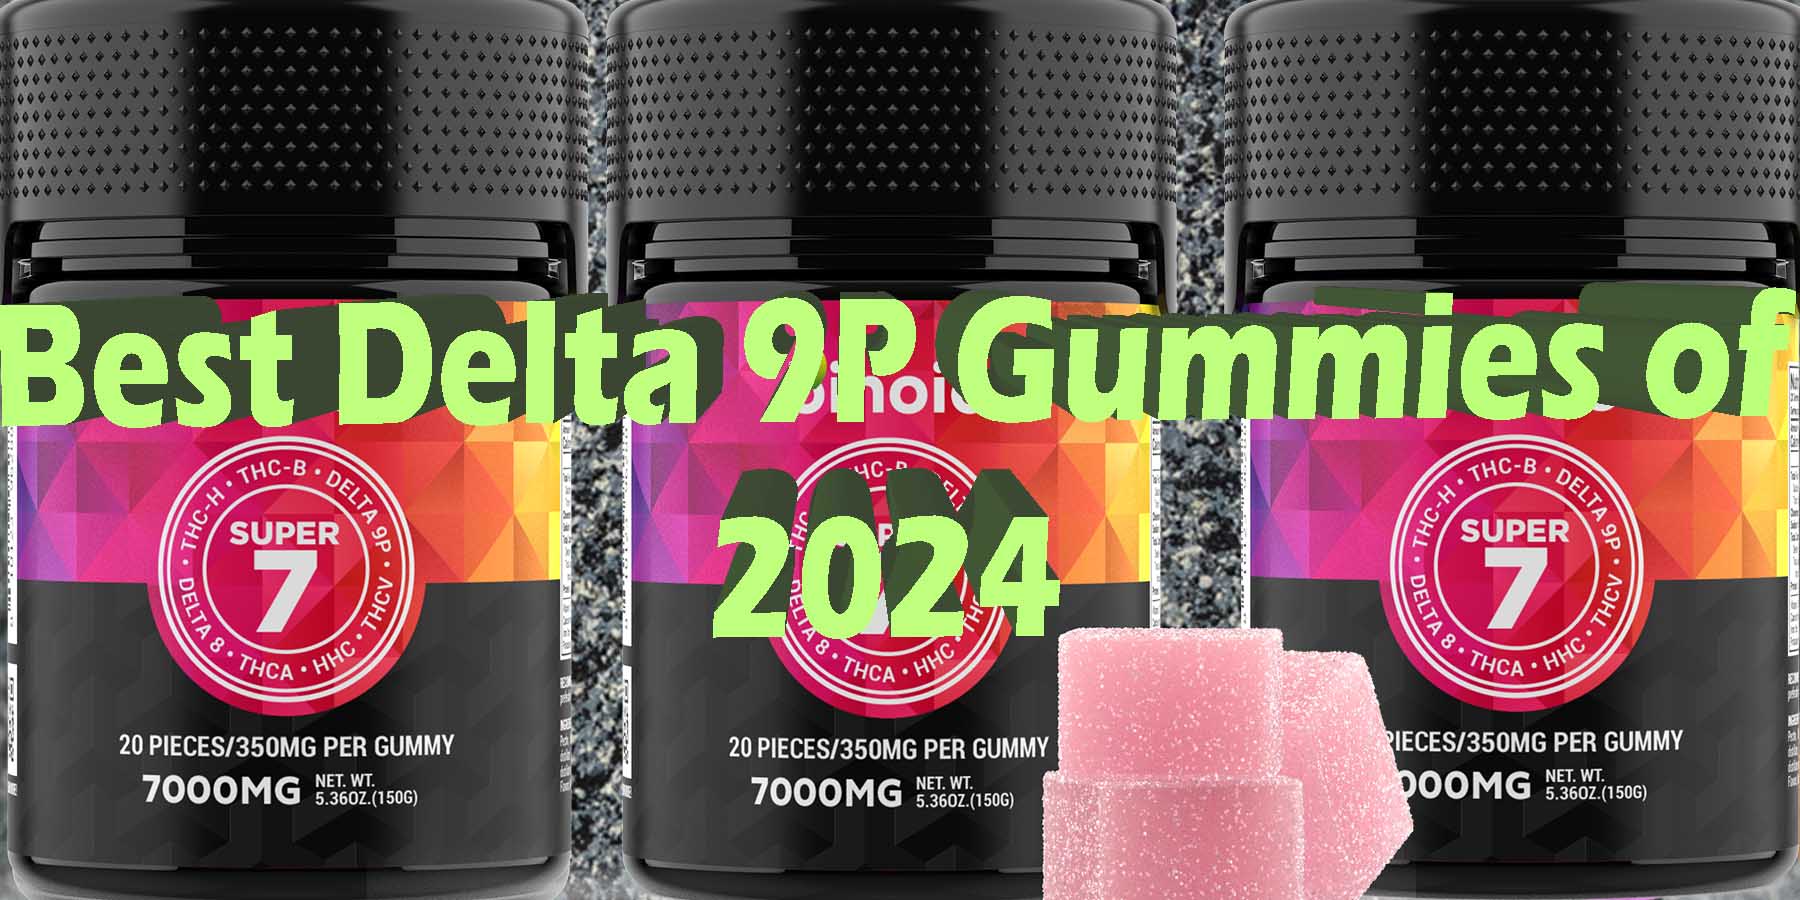 Best Delta 9P Gummies of 2024 WhereToGet HowToBuy BestPrice GetNearMe Lowest Coupon DiscountStore ShopOnline Quality Legal Binoid For Sale Review ShopBinoid